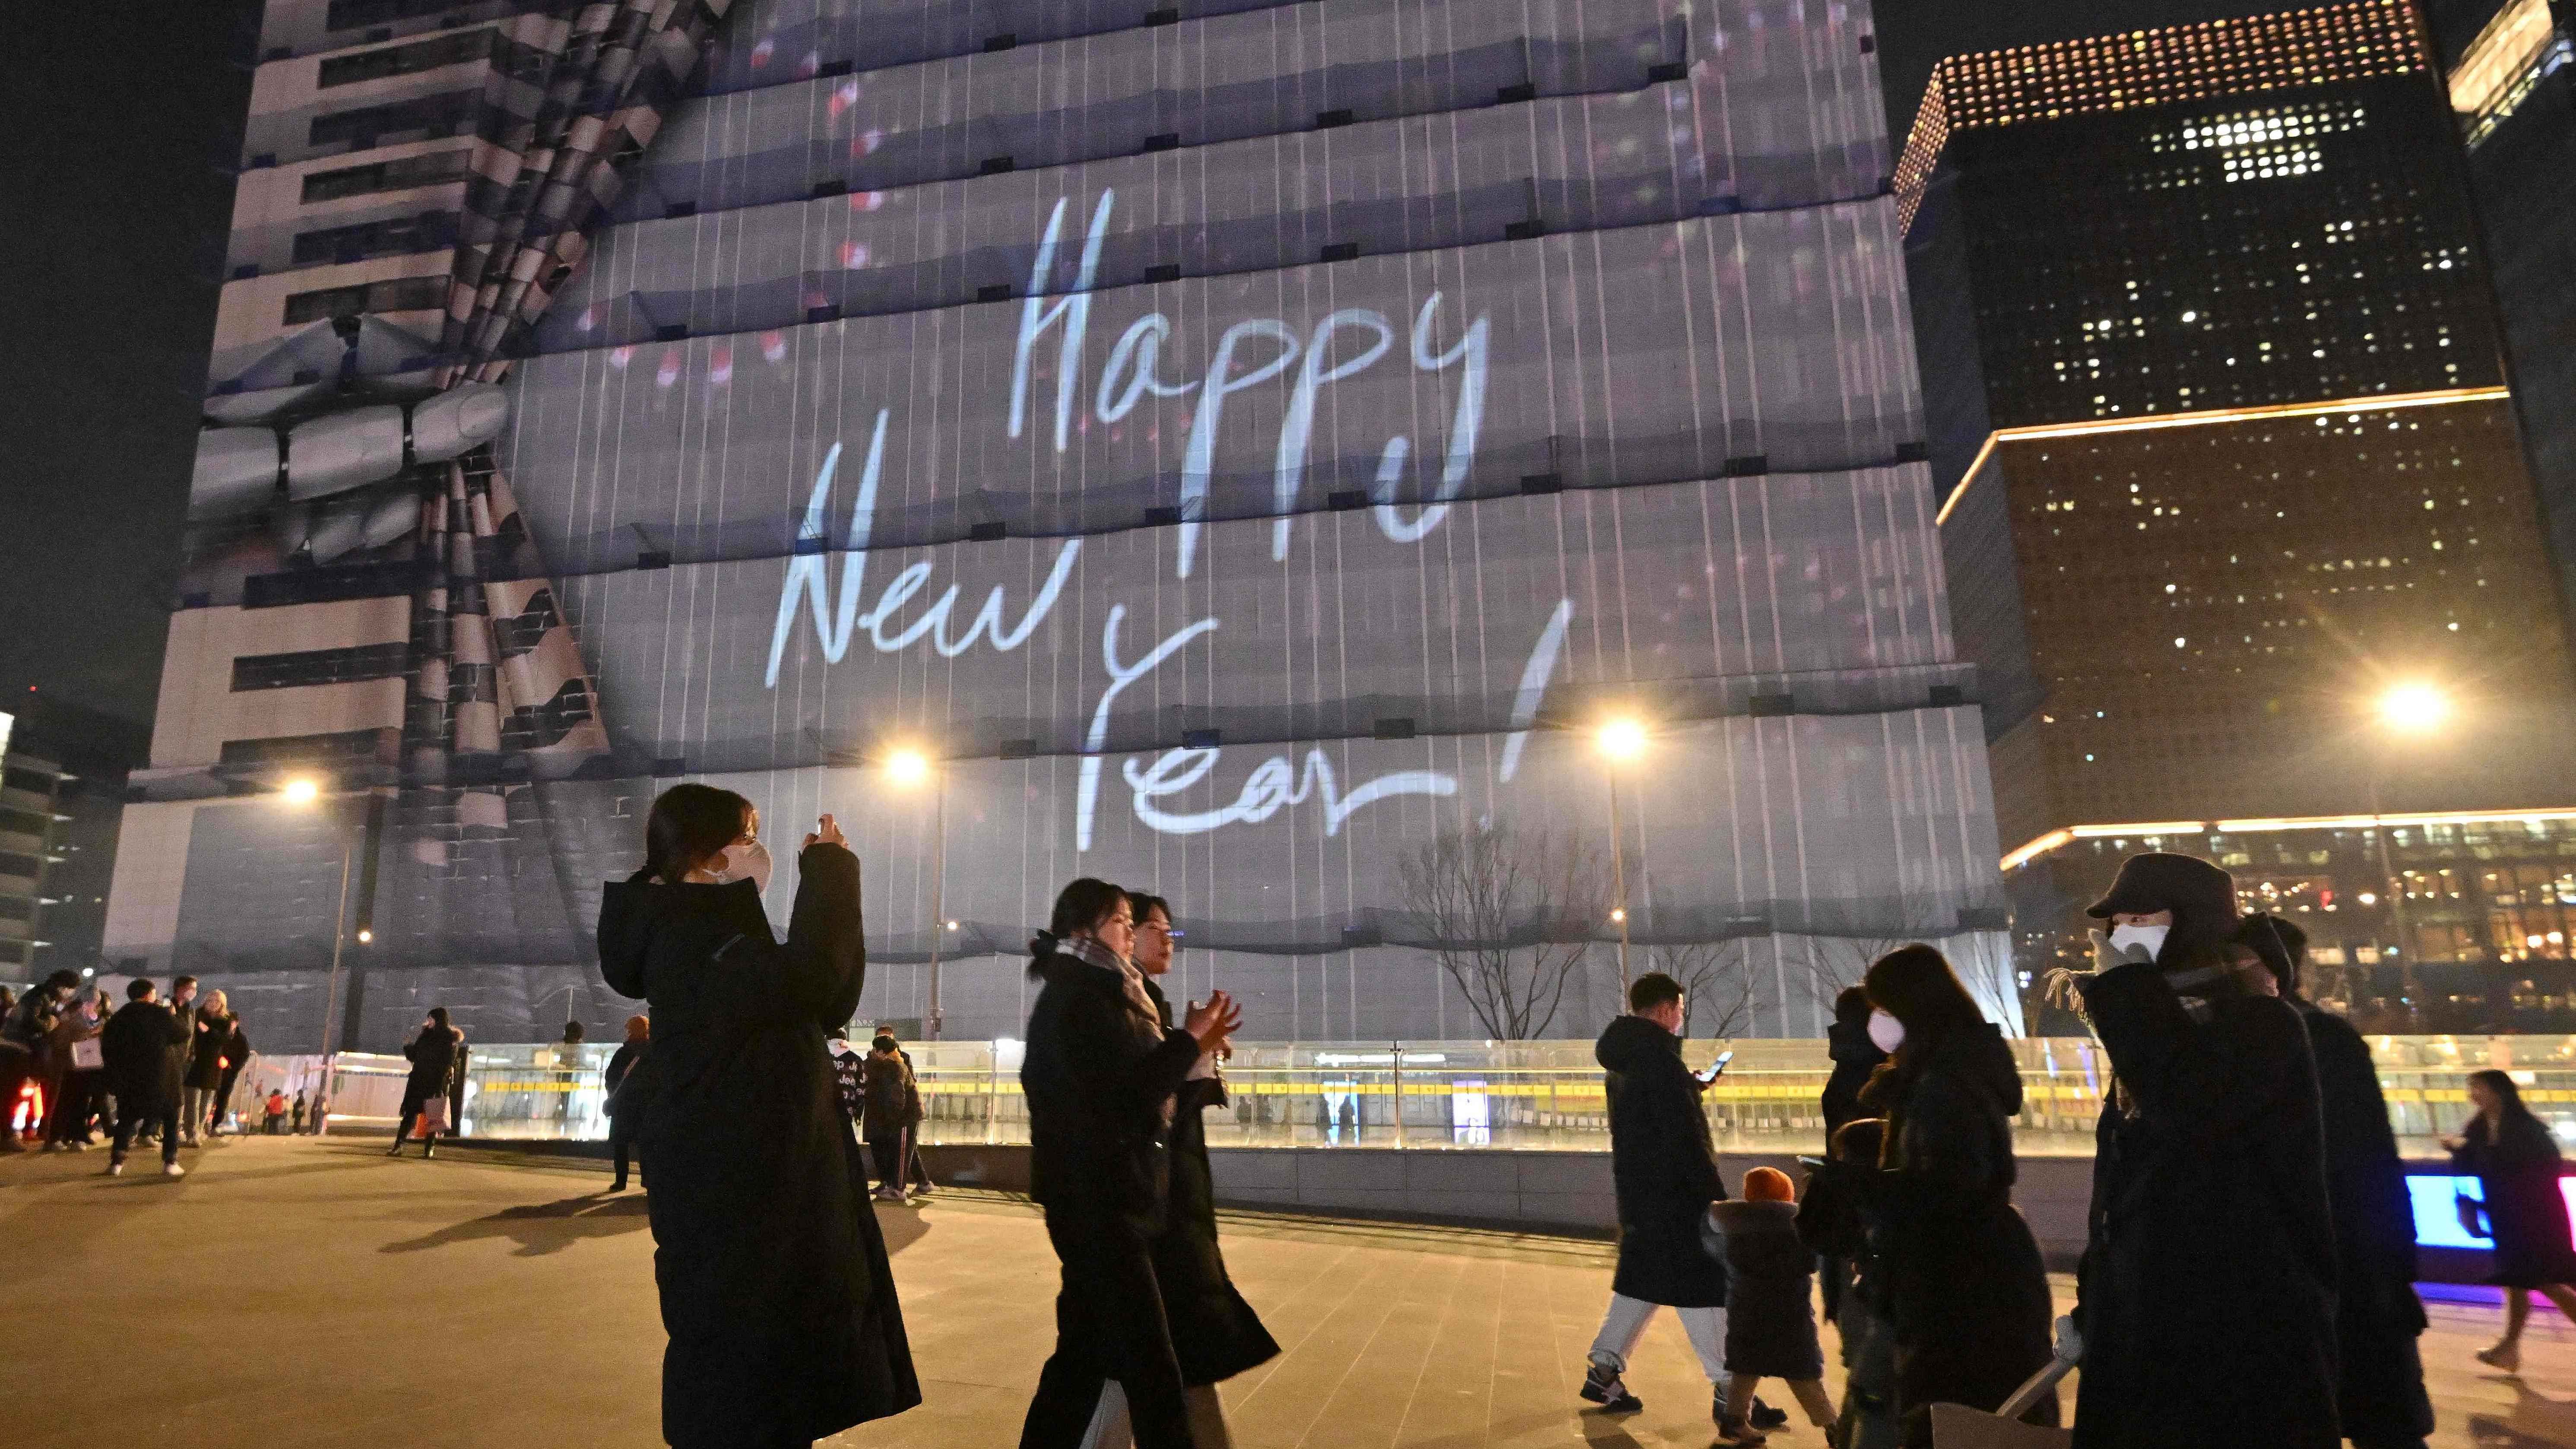 People enjoy the last day of the year on New Year's Eve at Gwanghwamun square in central Seoul on December 31. Credit: AFP Photo